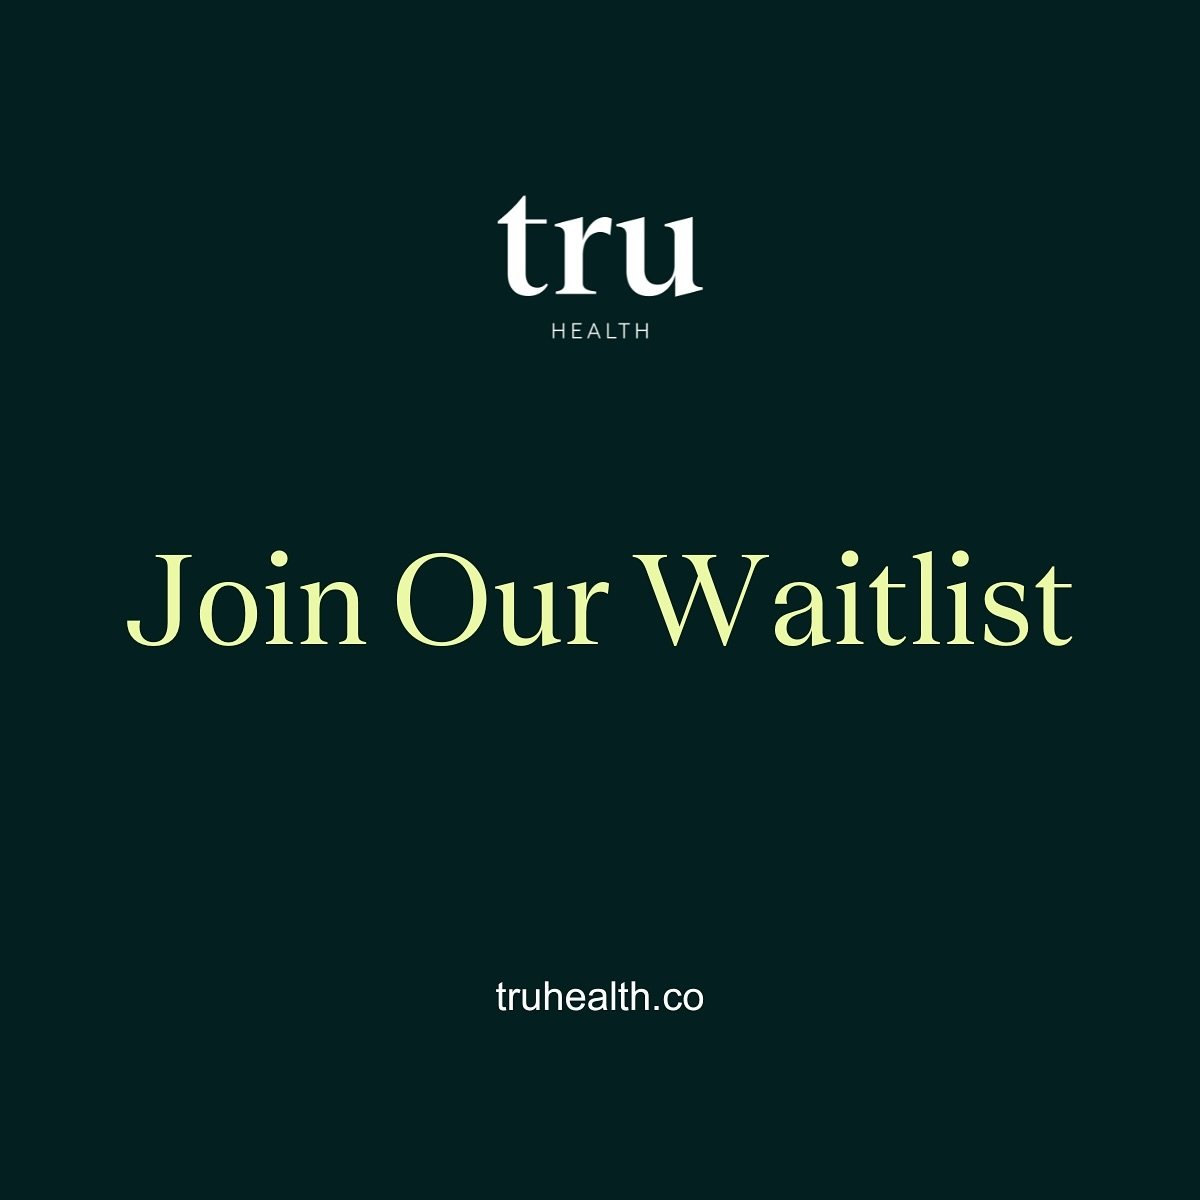 ✨📣 EXCITING NEWS!!! 📣✨

Opening the waitlist for our new venture Tru Health - a health tech start-up that will be launching this summer! 

I&rsquo;ve thoroughly enjoyed working with co-founders @amyofla and @ferguskerrigan to develop an advanced he